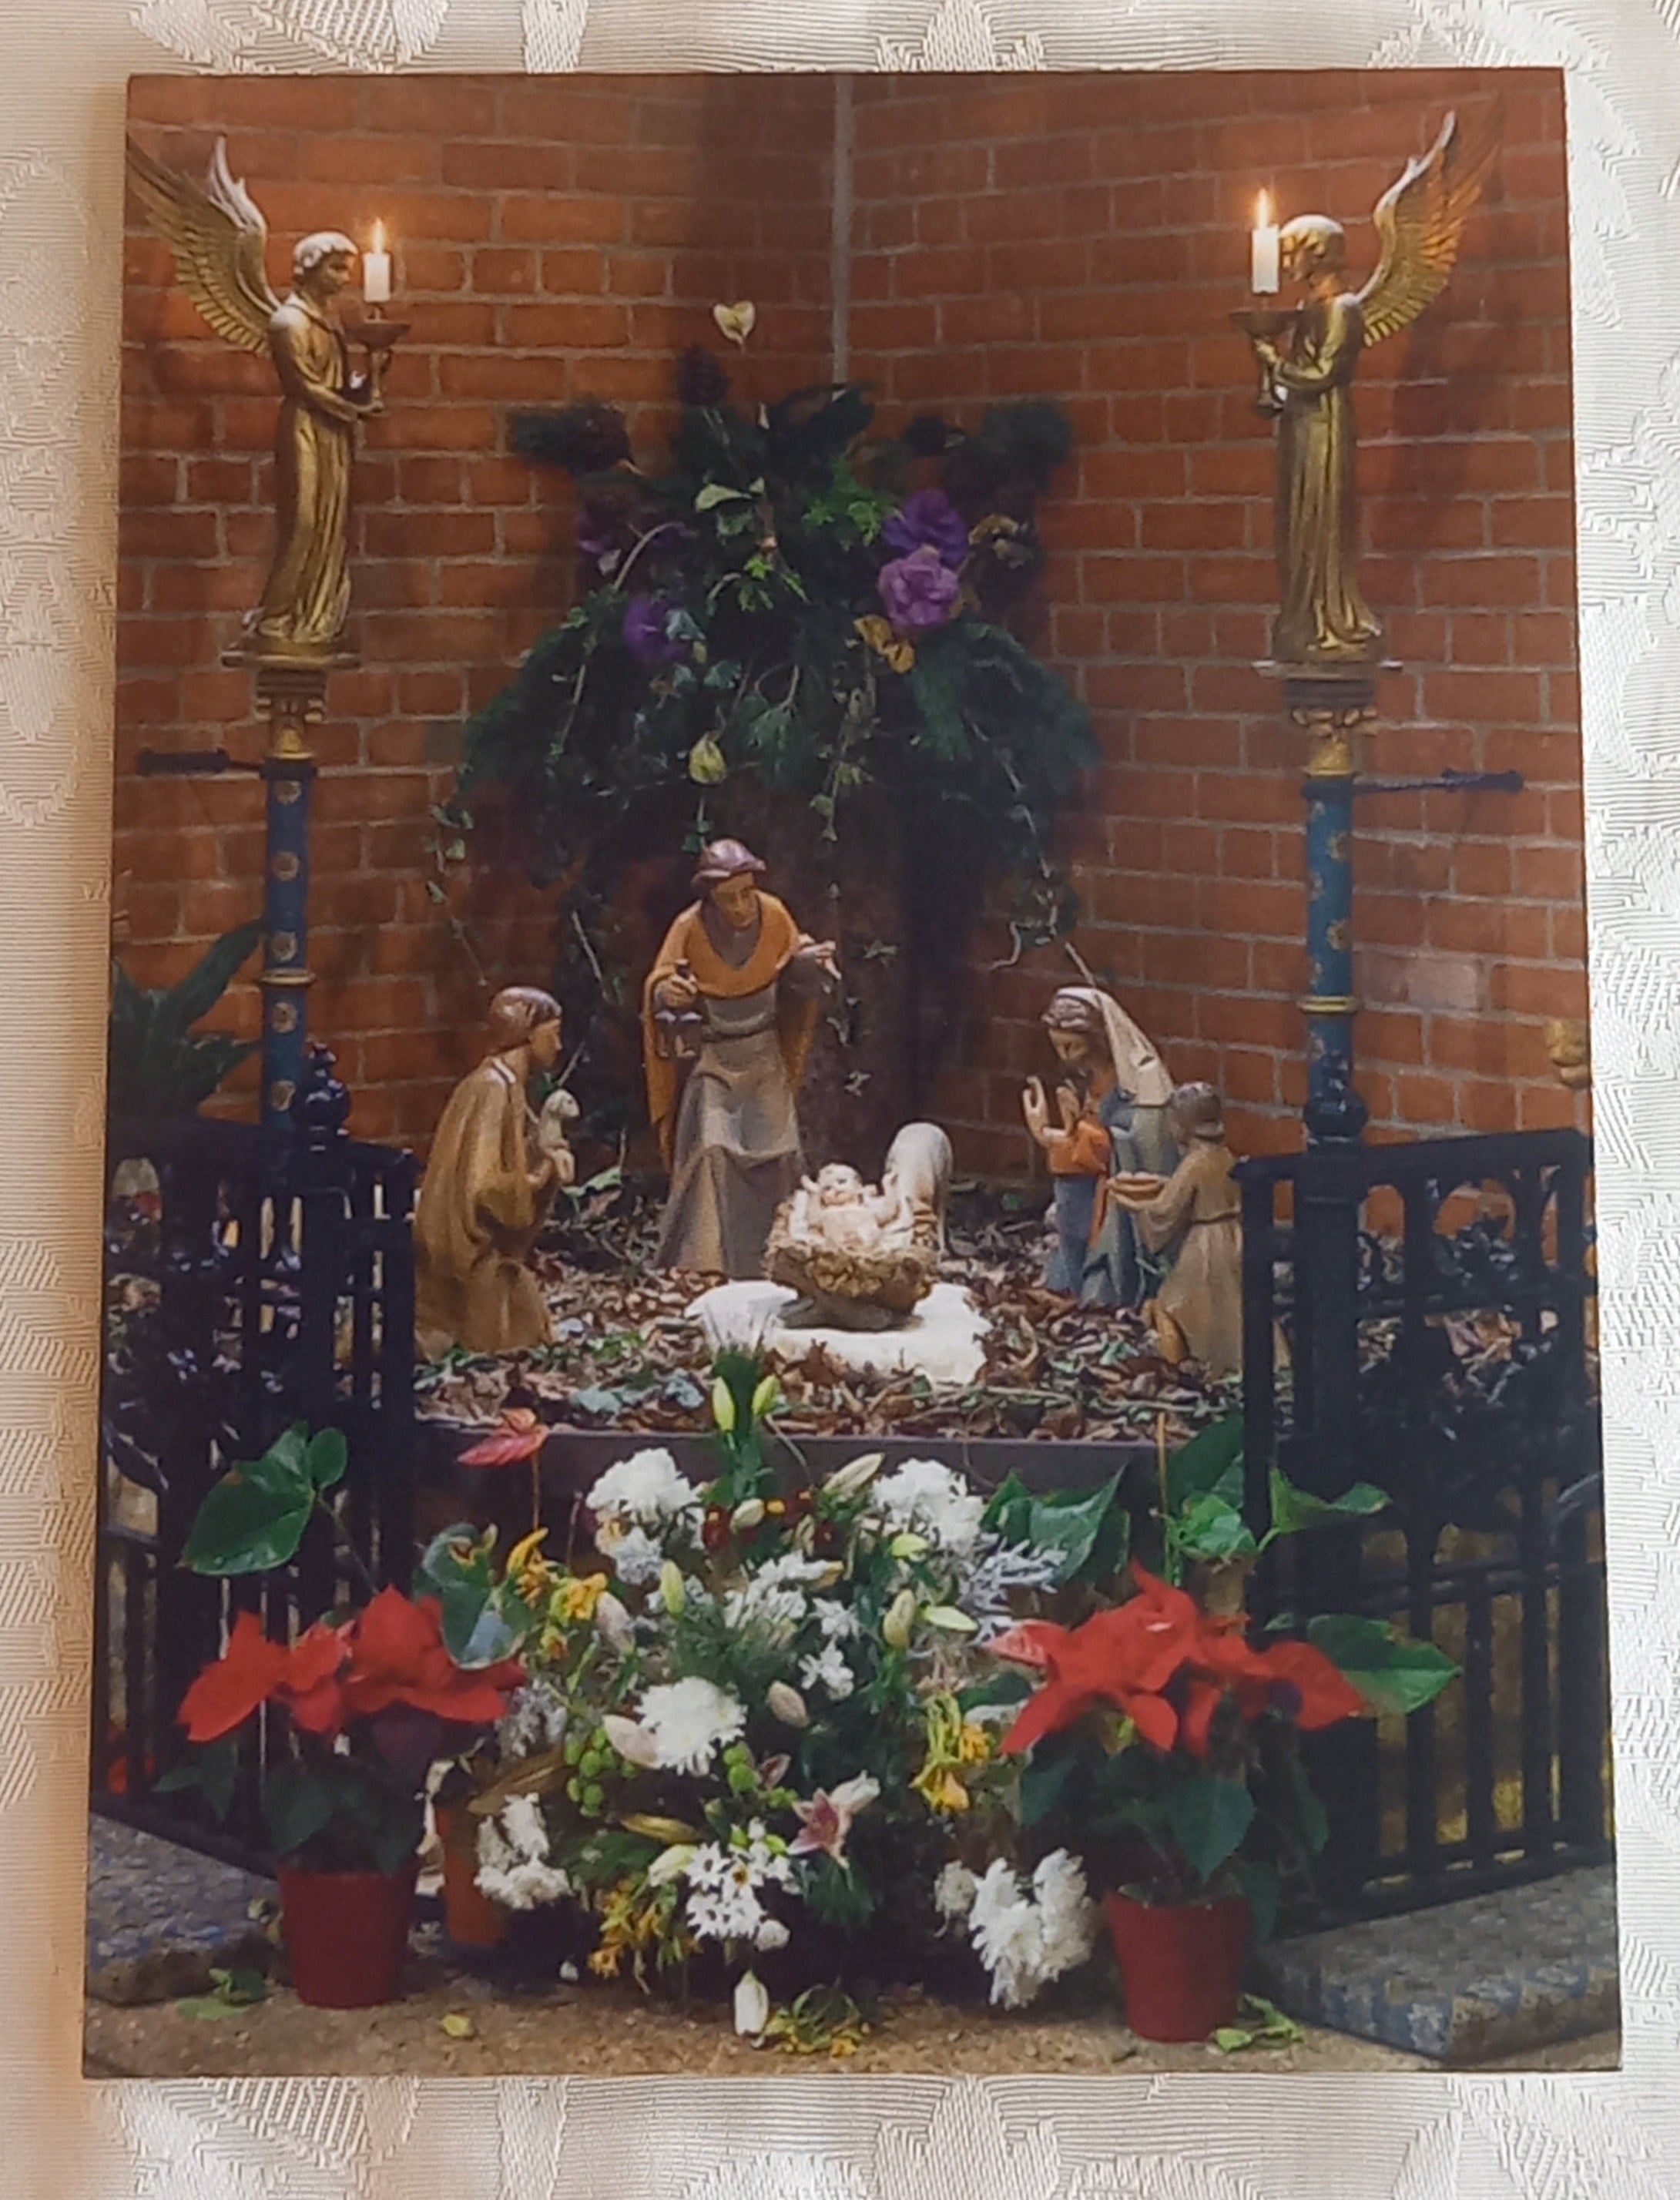 50% Discount - Pack of 10 Walsingham Christmas Cards